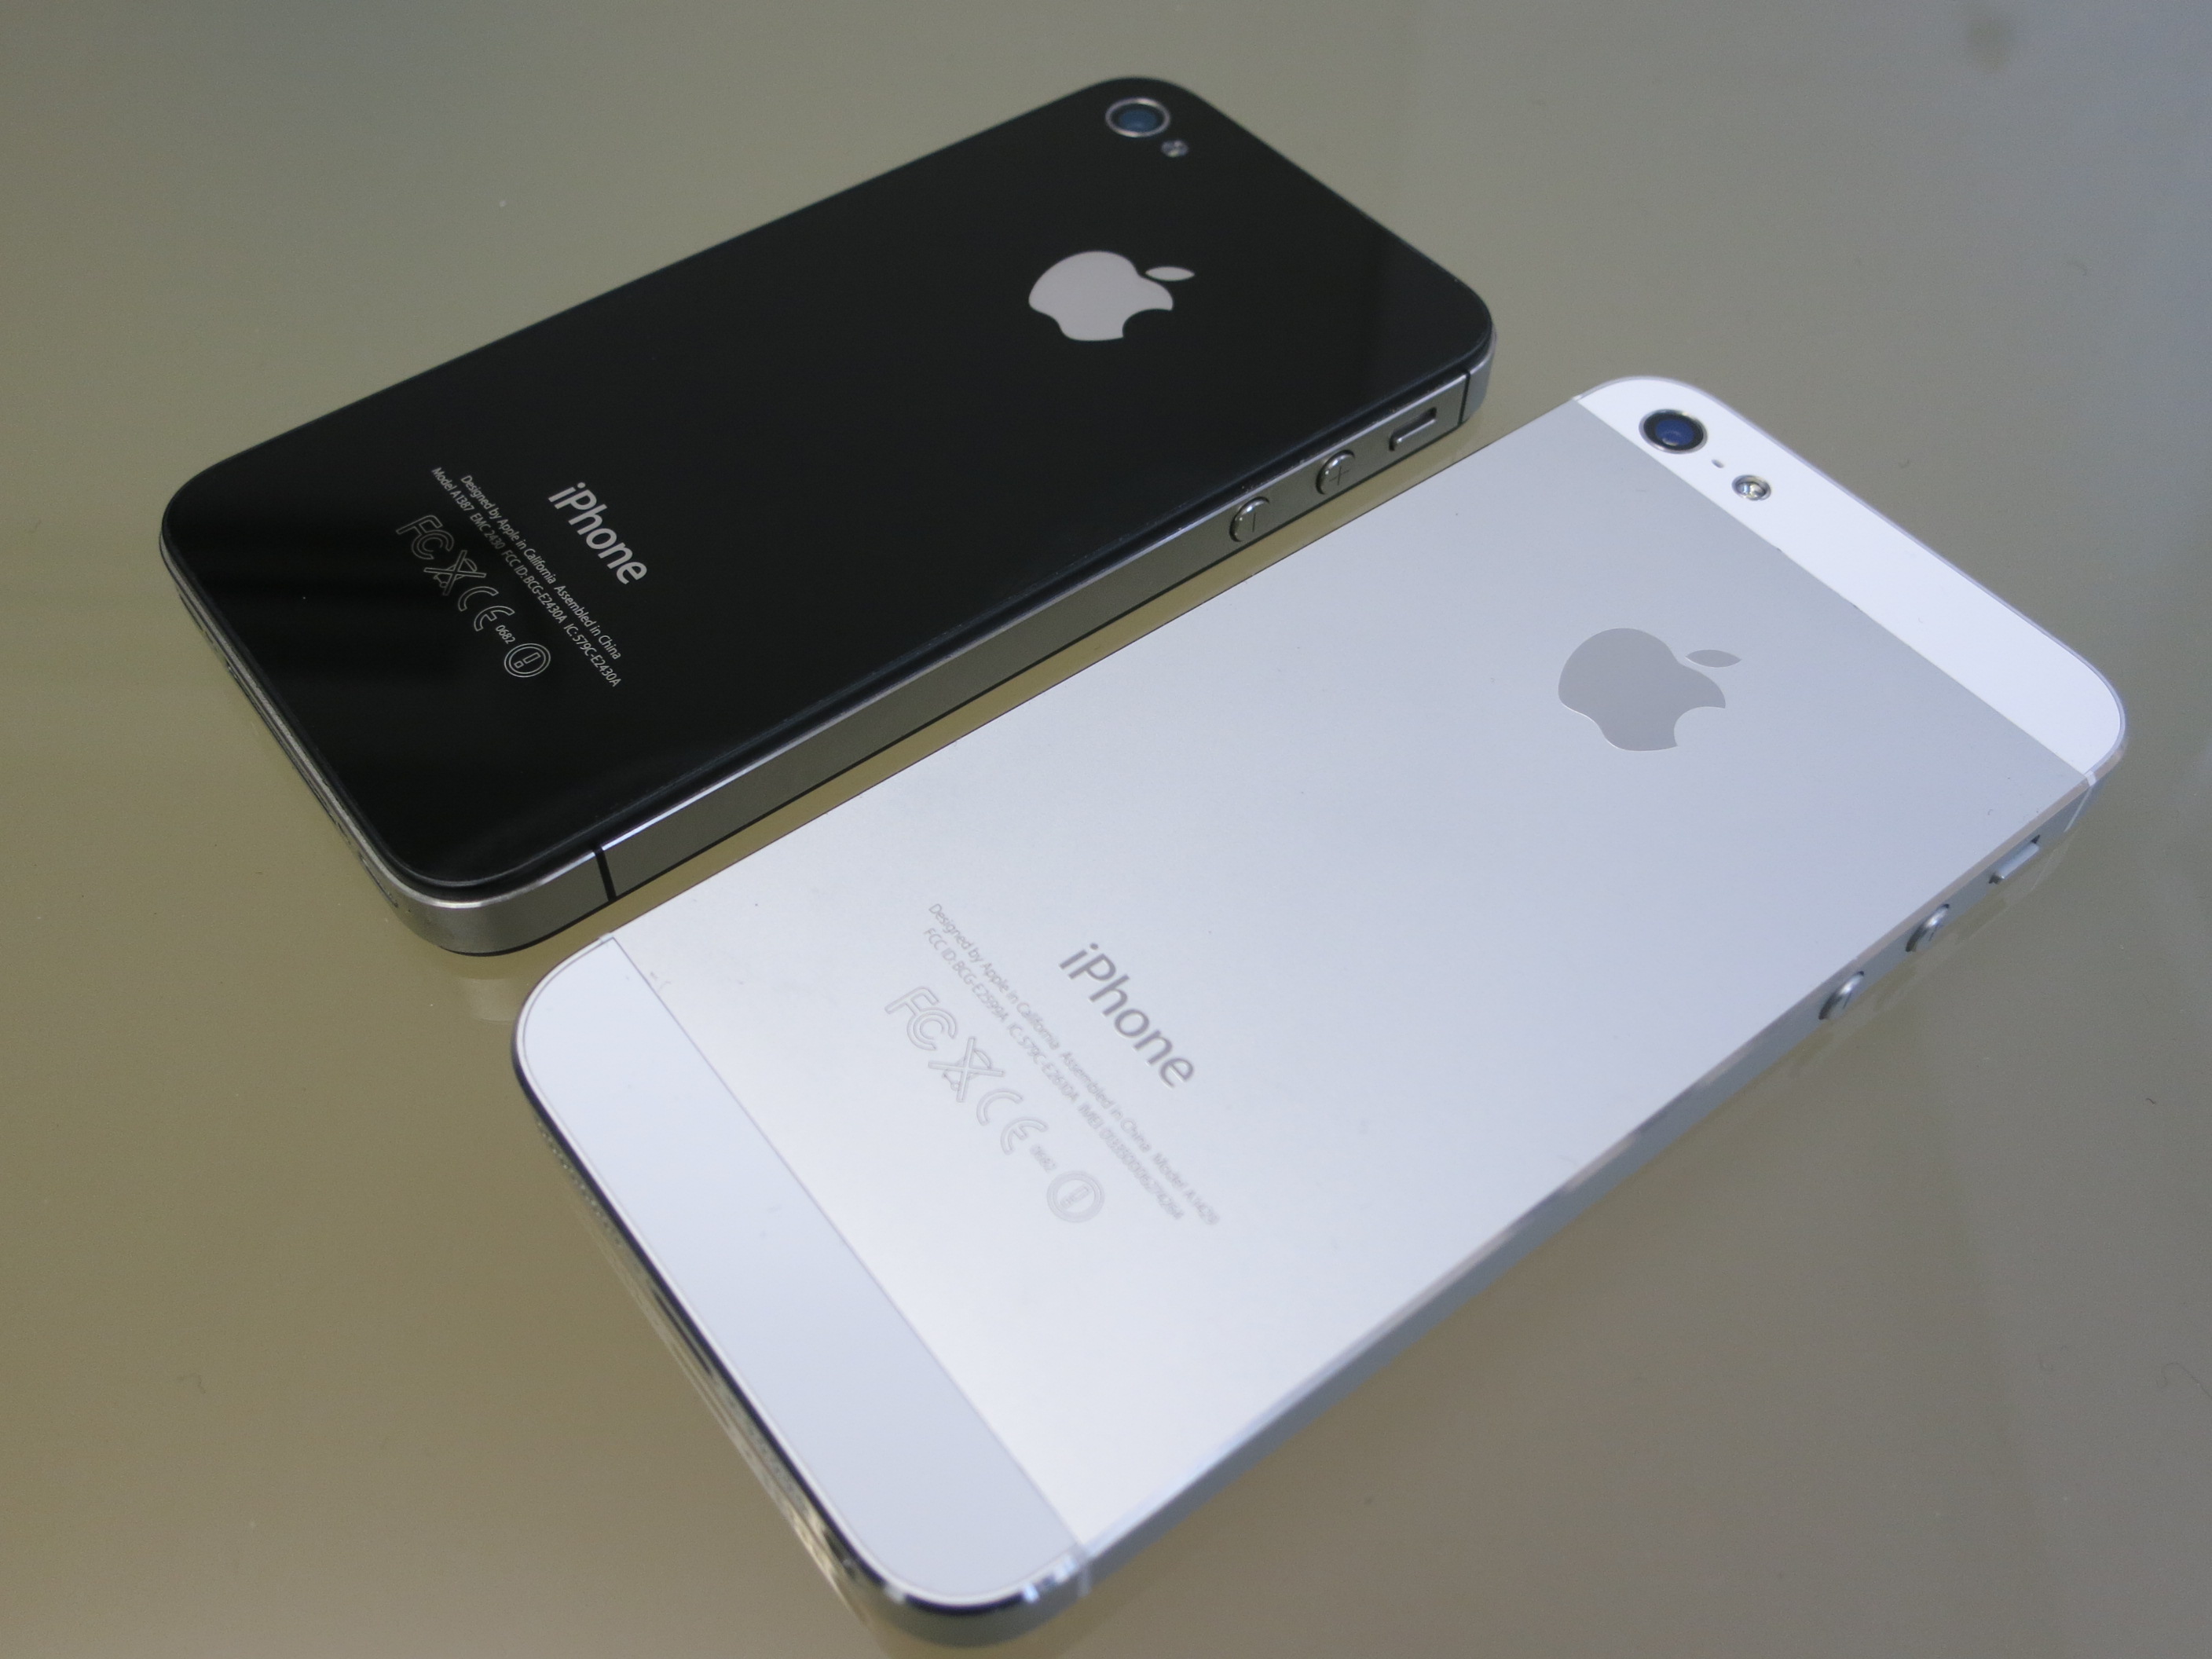 Apples New Iphone 5 Vs Iphone 4s Comparison Itooletech